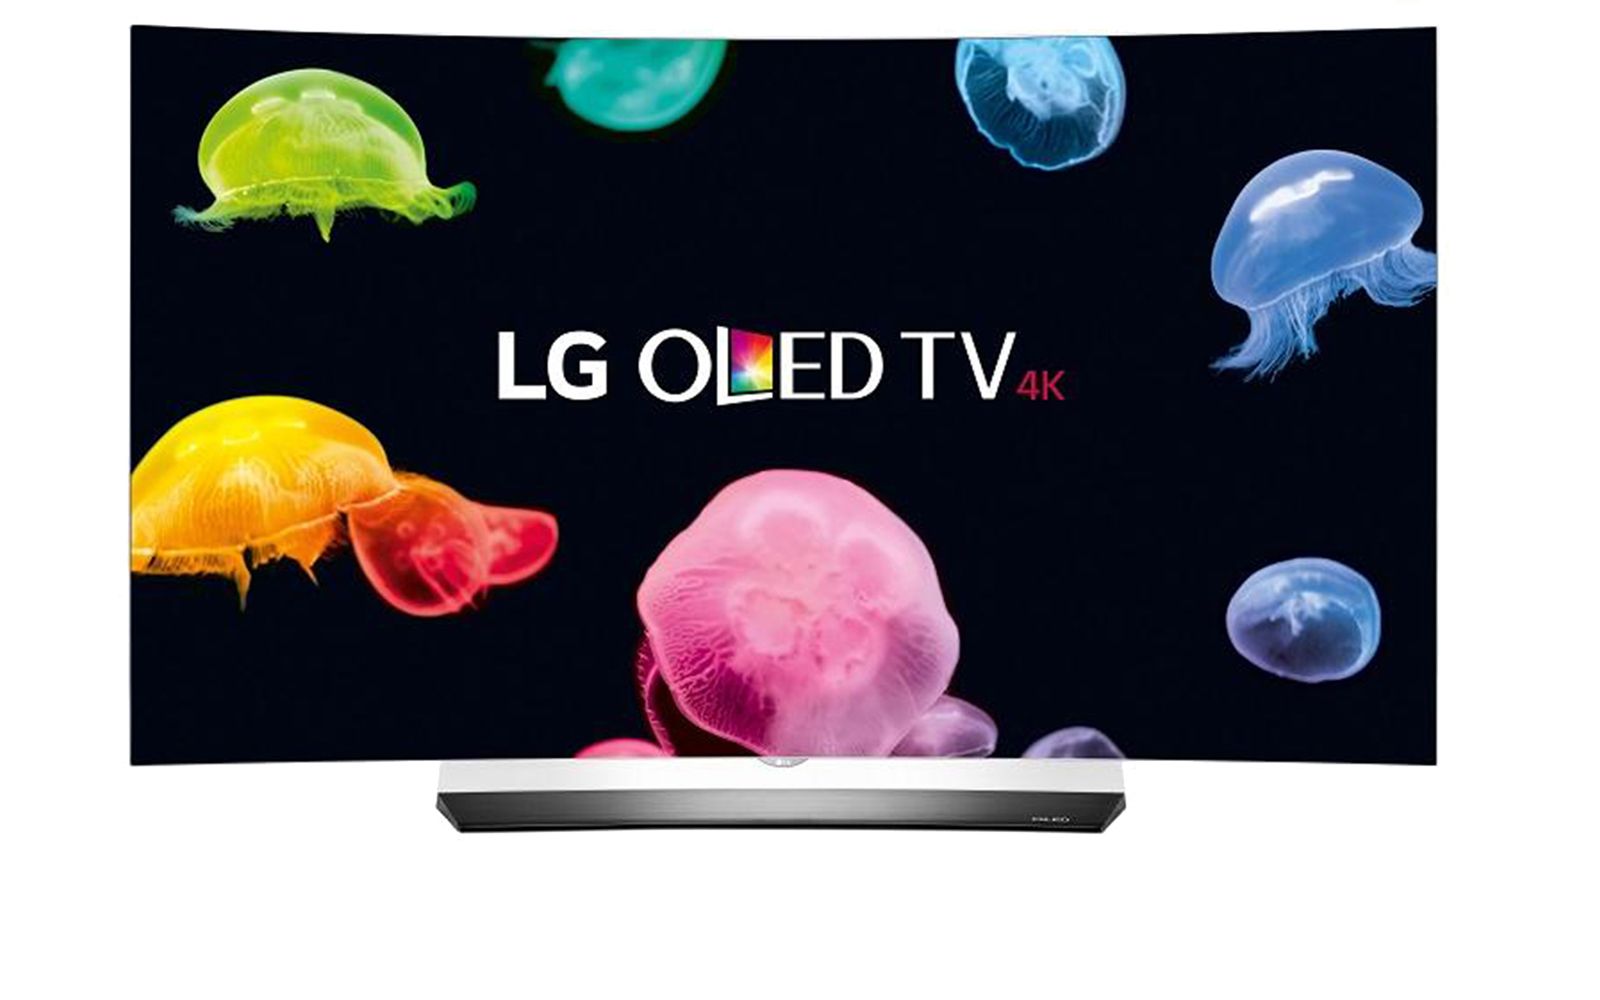 lg 4k hdr choices for 2016 g6 e6 c6 and b6 tvs compared image 4